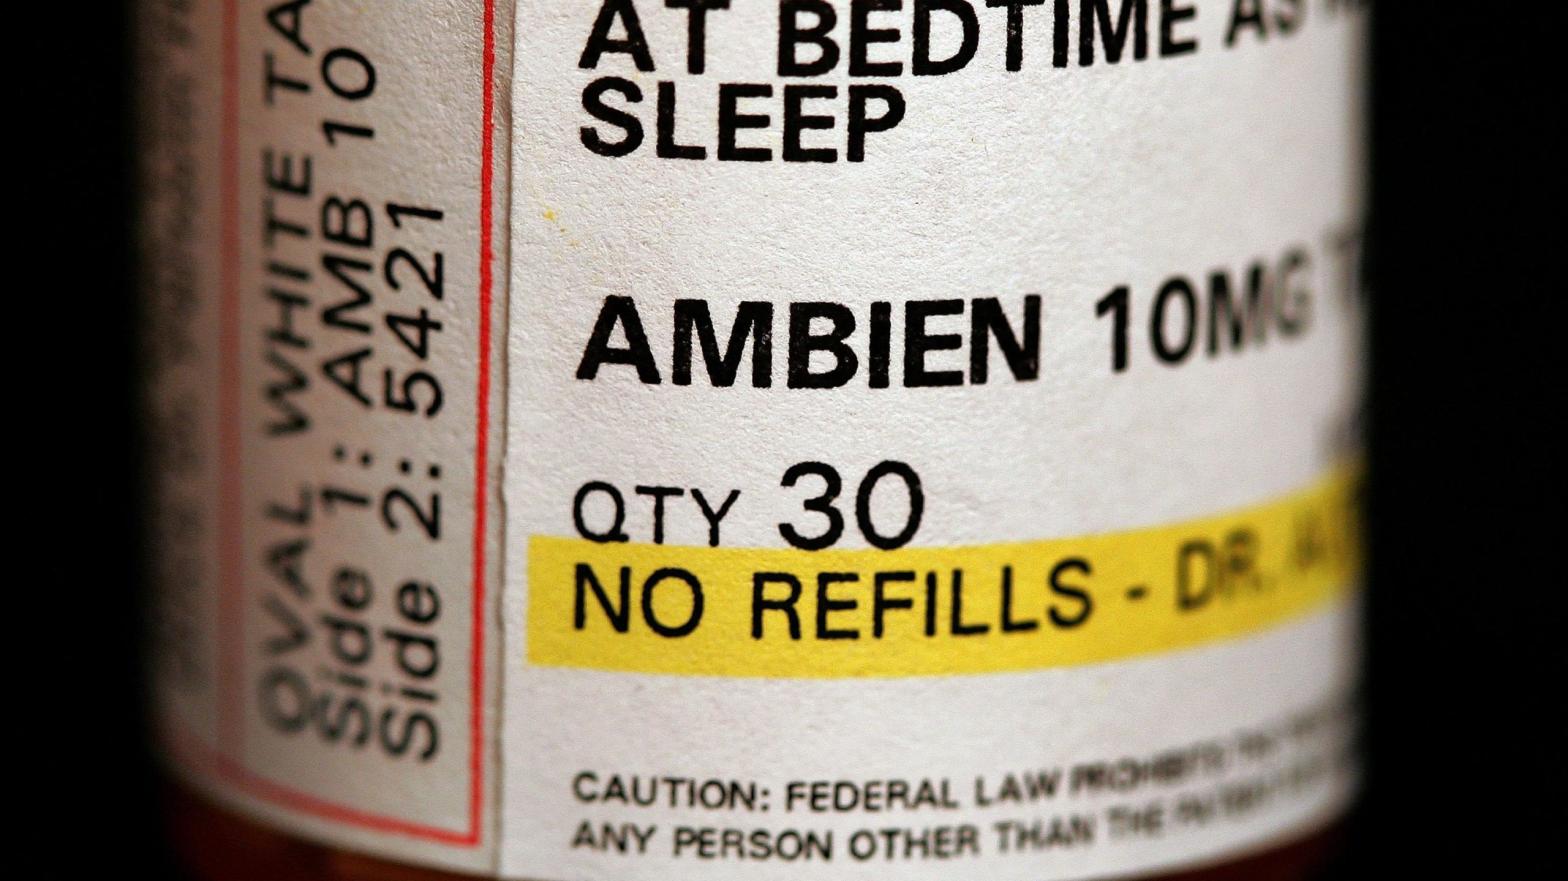 A prescription bottle of Ambien, also called zolpidem (Photo: Tim Boyle, Getty Images)